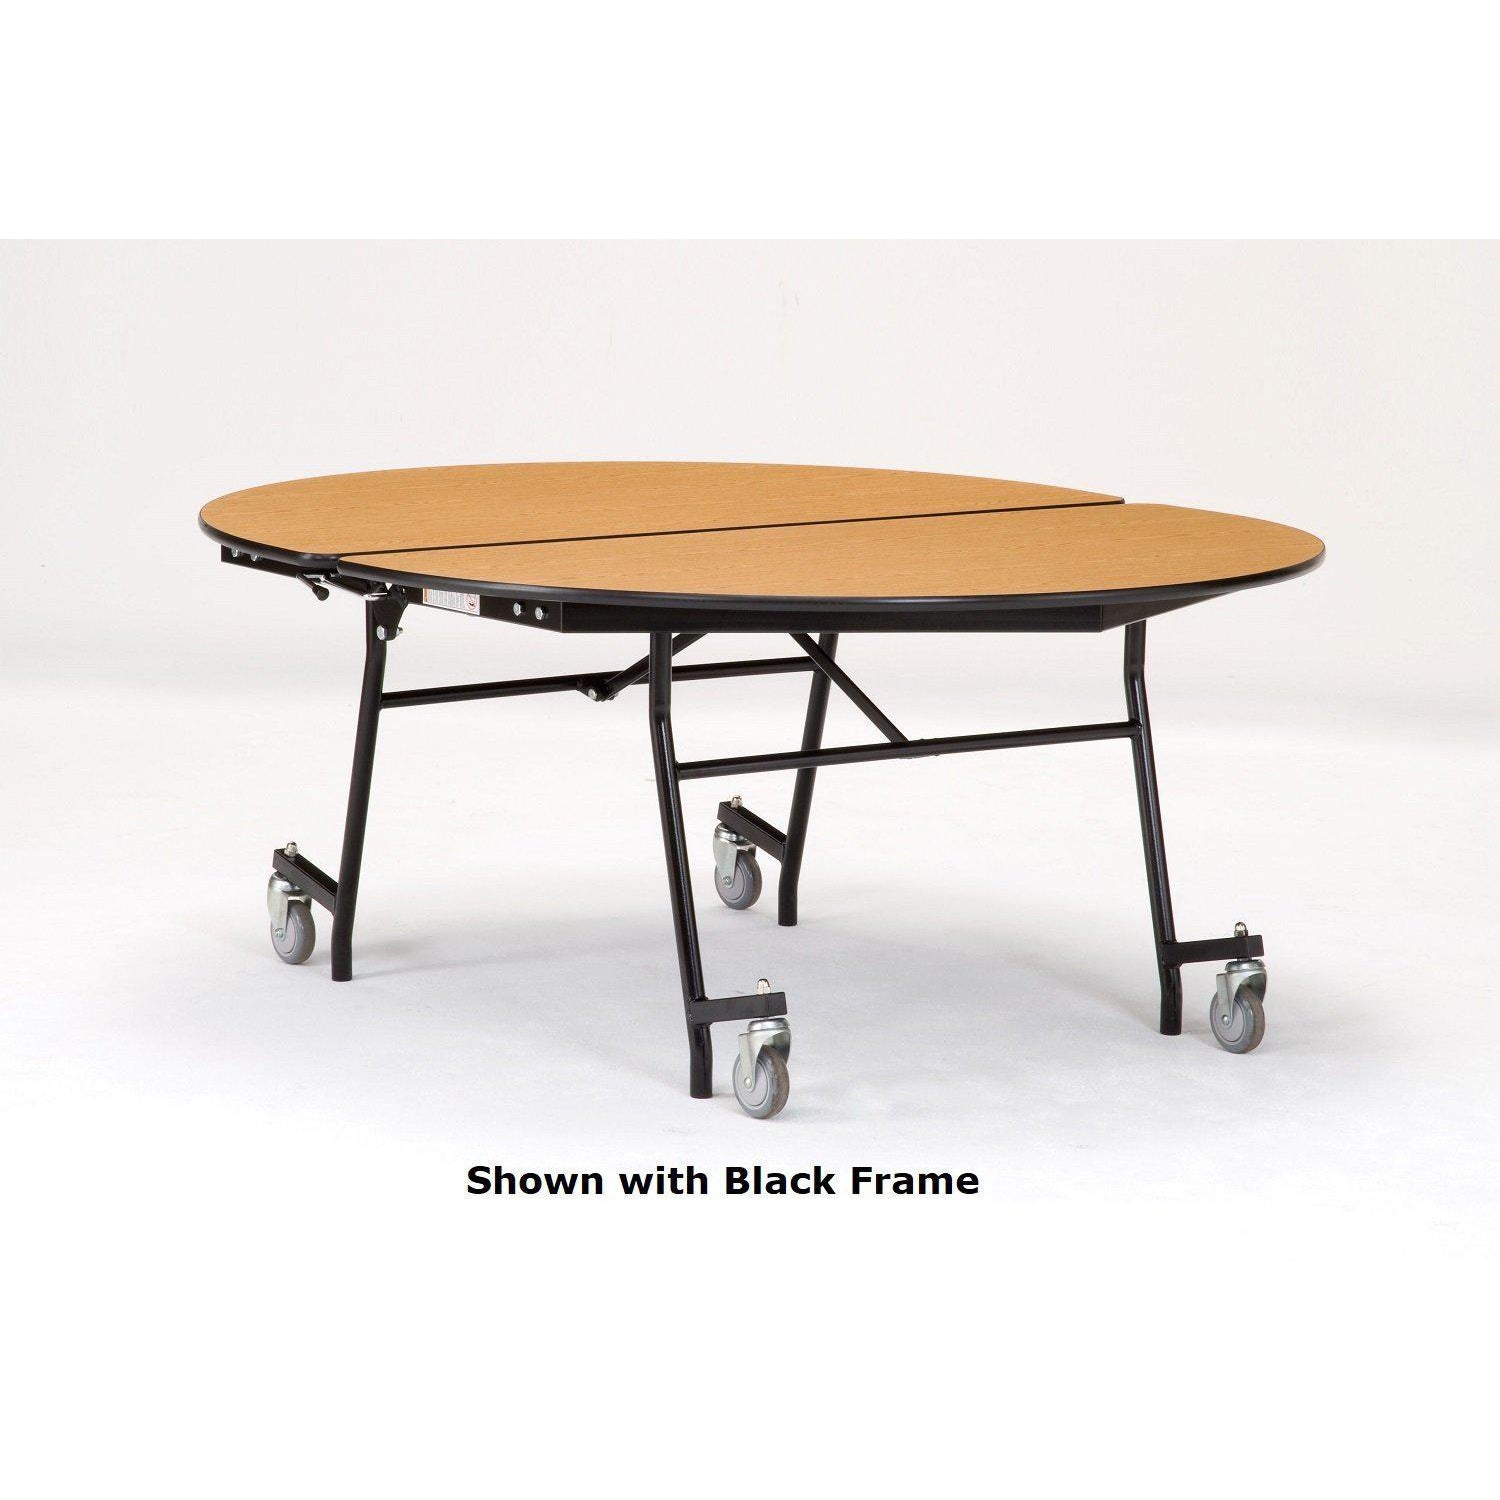 Mobile Shape Cafeteria Table, 72" Oval, Plywood Core, Vinyl T-Mold Edge, Chrome Frame